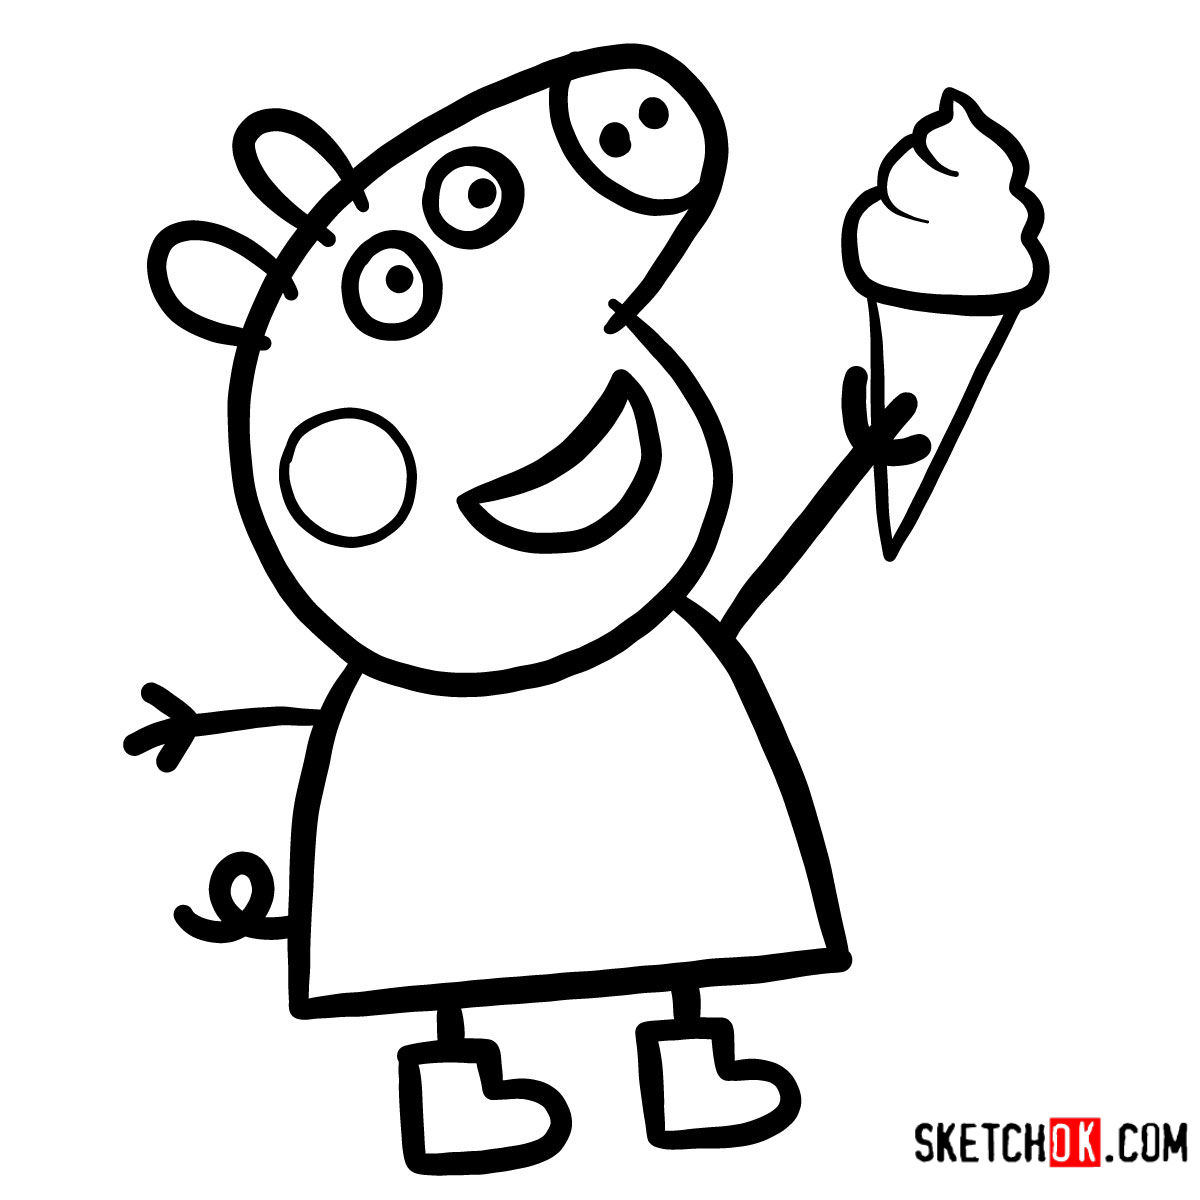 How to draw Peppa Pig with an icecream - Sketchok easy ...